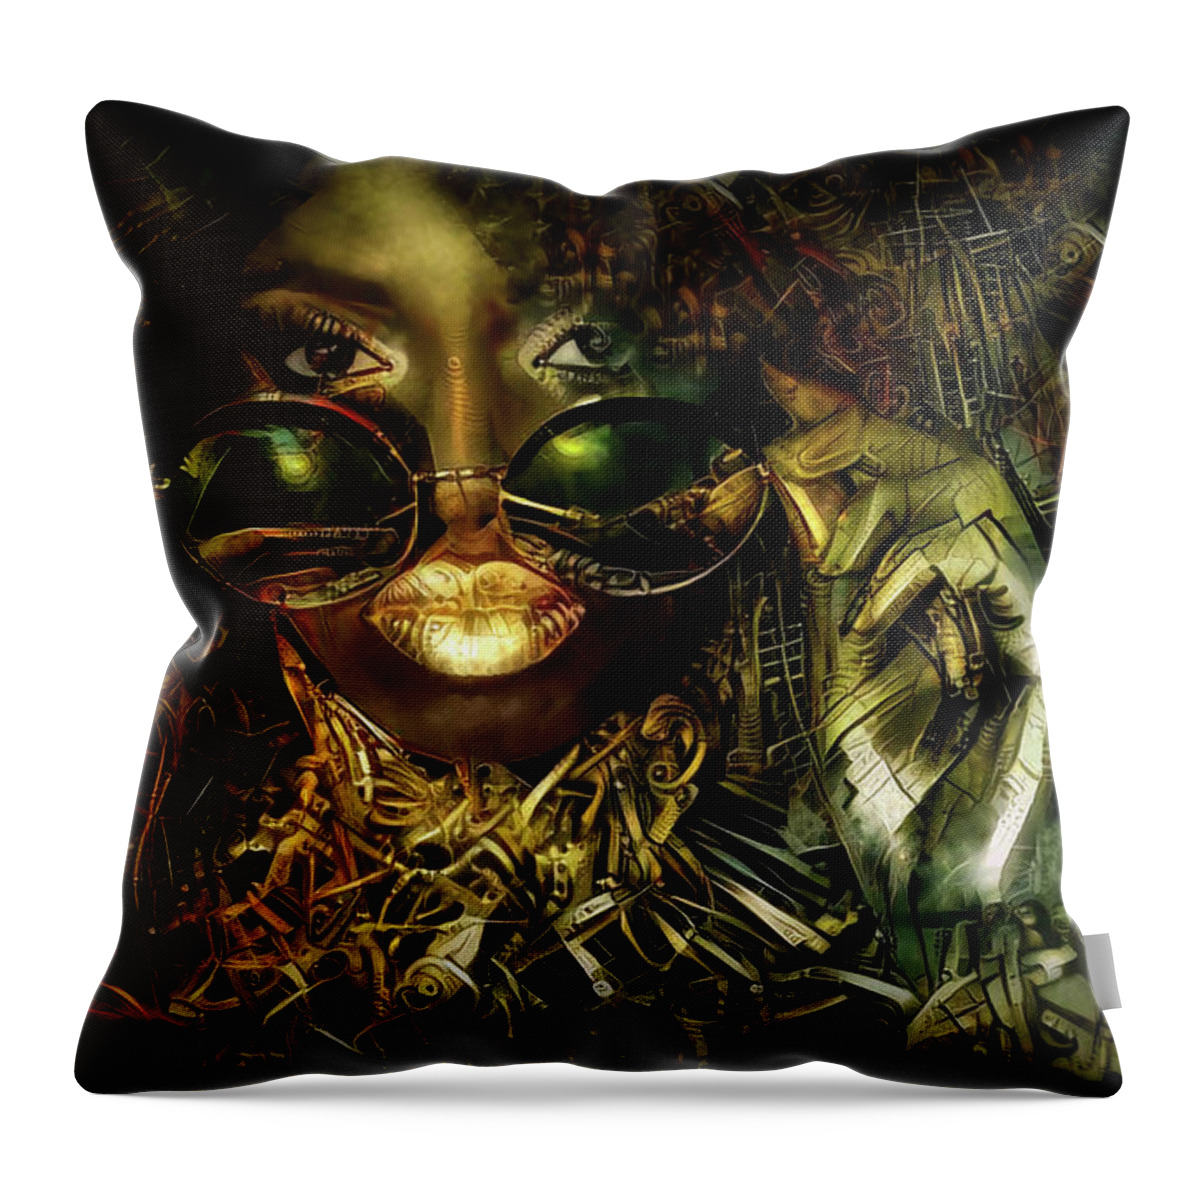 Enchantress Throw Pillow featuring the mixed media Mysterious Enchantress by Lilia S